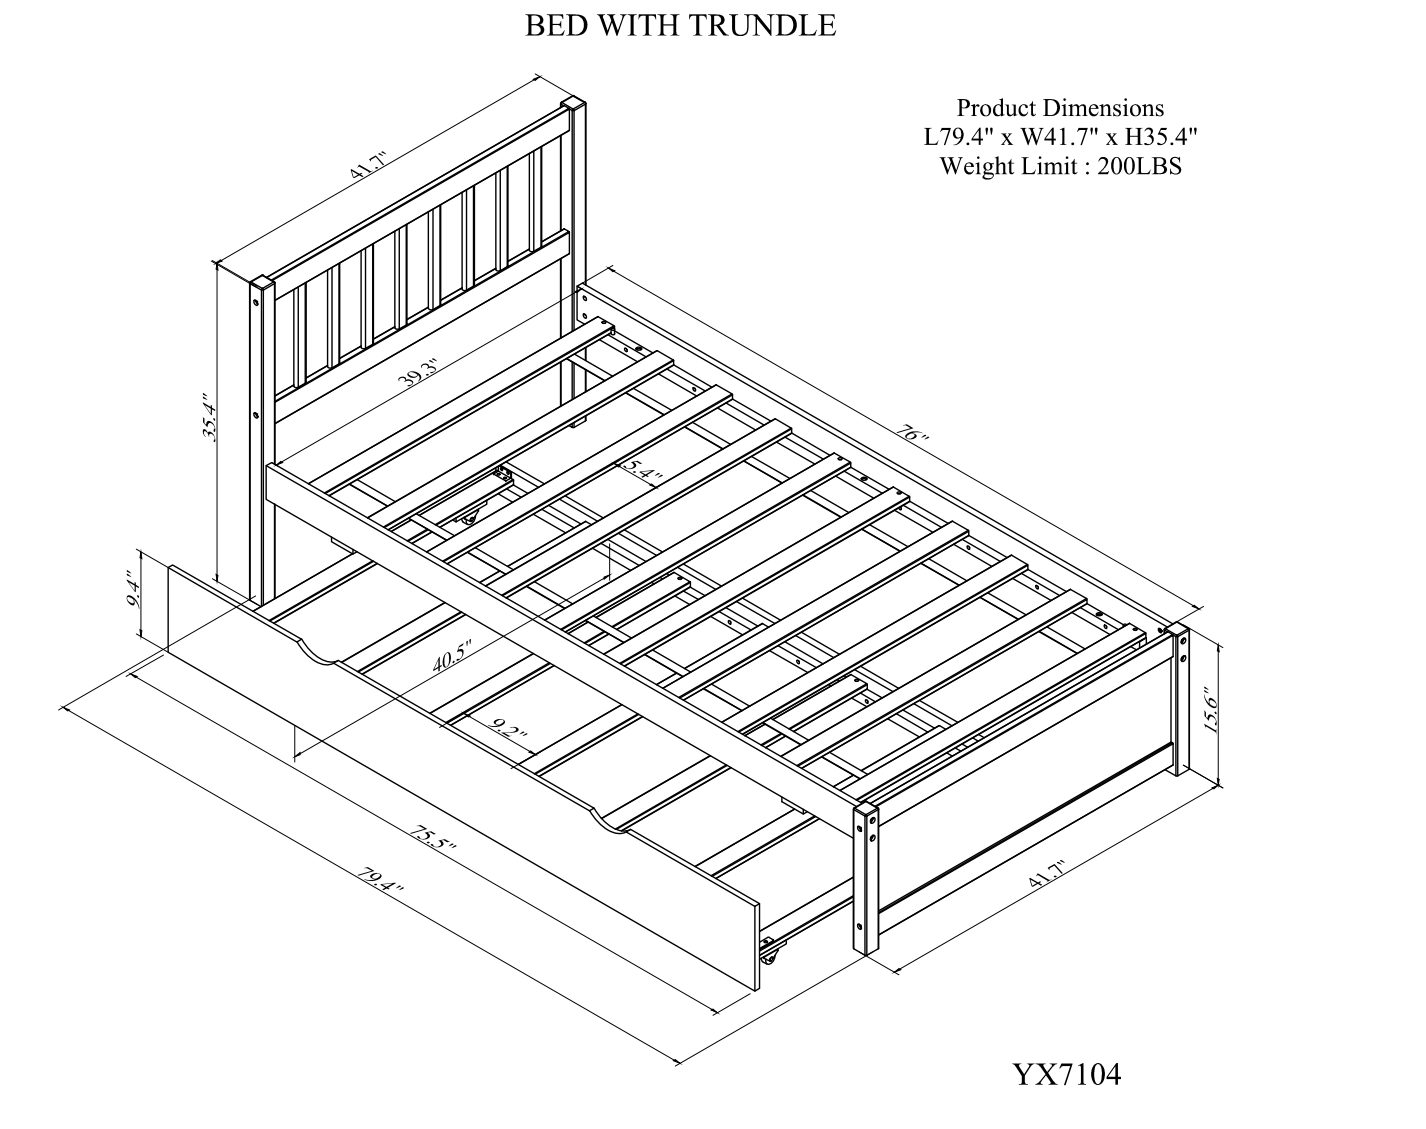 Wooden Twin Size Platform Bed Frame with Trundle for White Washed Color